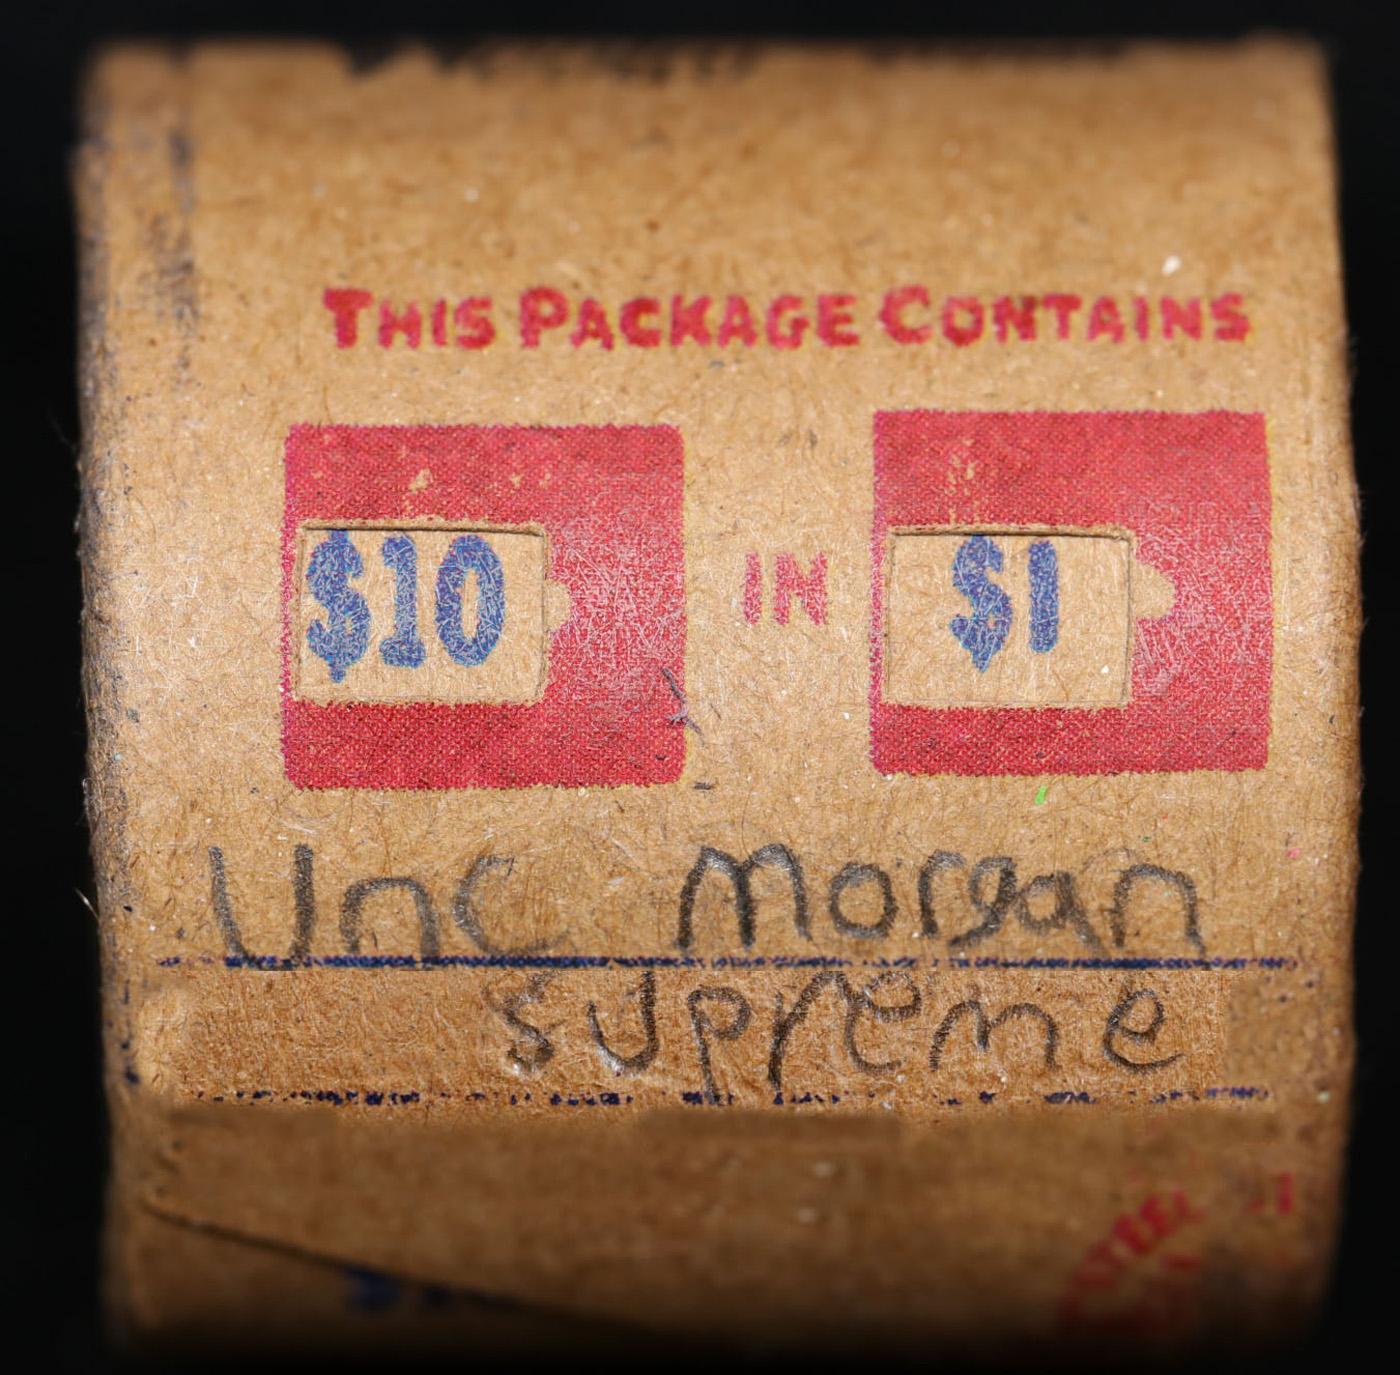 *Uncovered Hoard* - Covered End Roll - Marked "Unc Morgan Supreme" - Weight shows x10 Coins (FC)